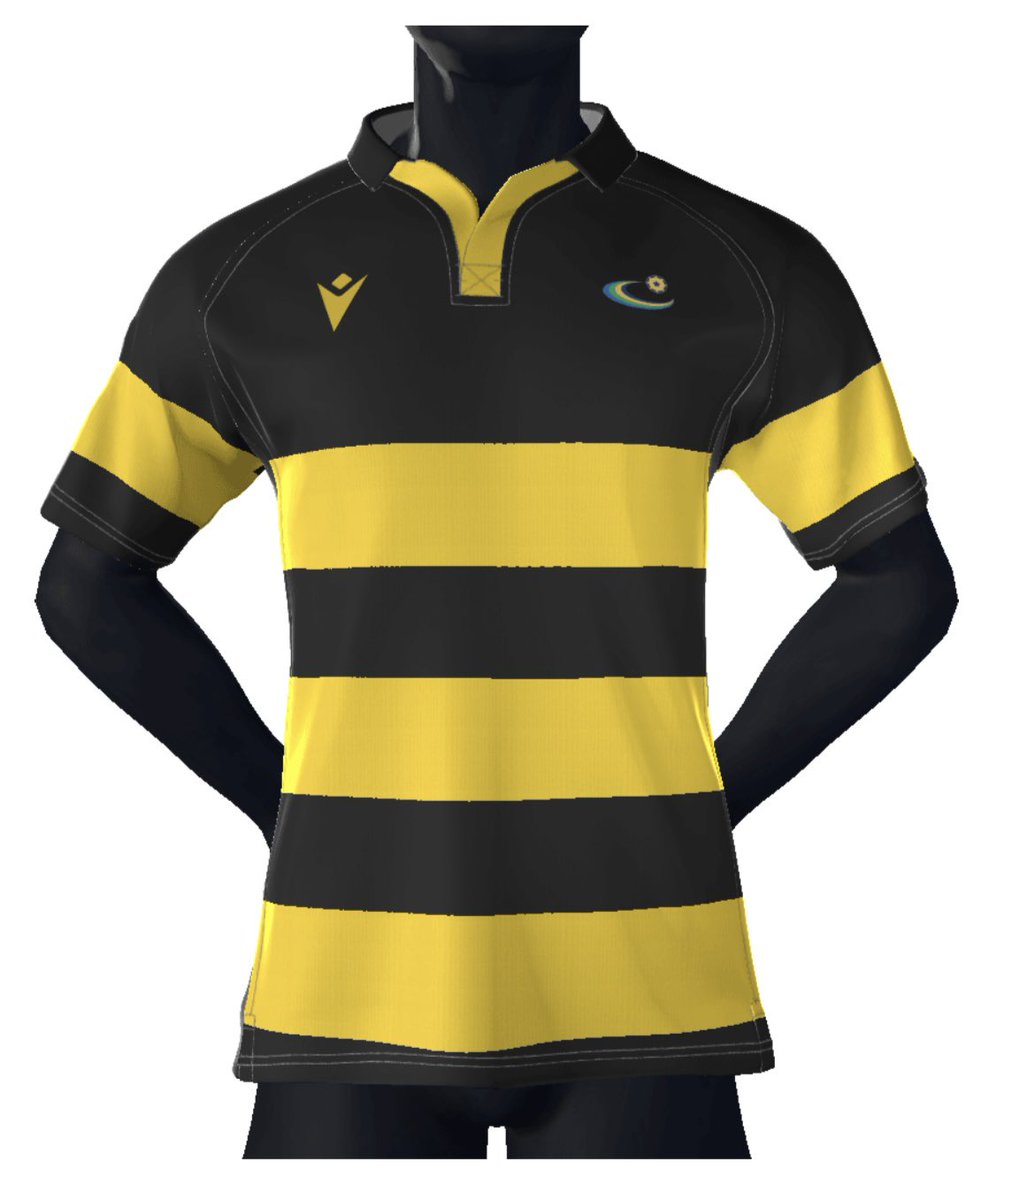 We are aiming to purchase a new set of kit (see below) for our senior rugby team for next year. The team plays in the Welsh Schools Premier League. If anyone would like to sponsor us and have an advertisement on the kit please contact KillaA3@hwbcymru.net